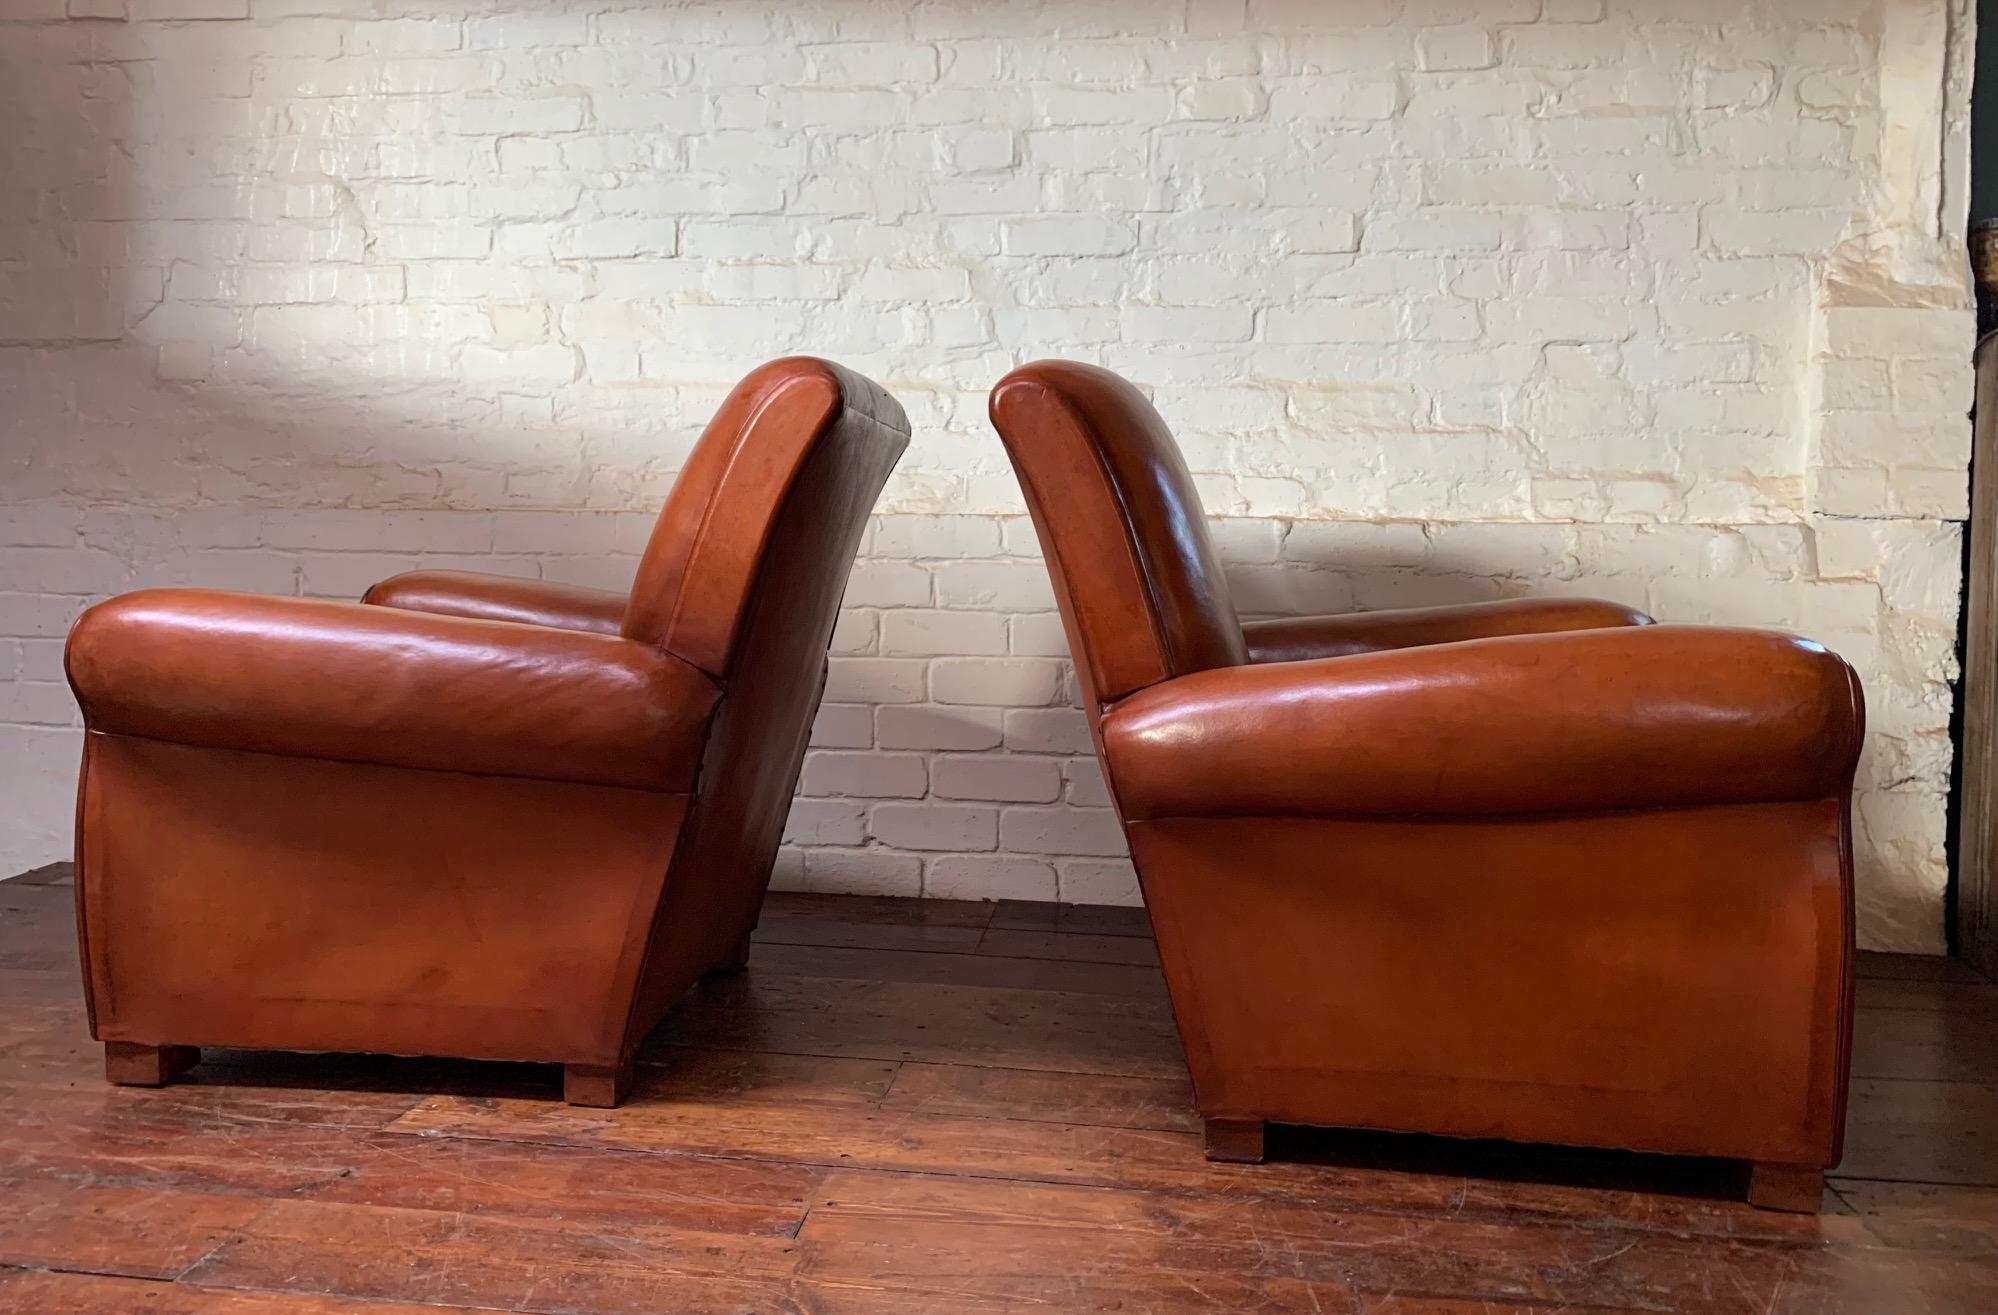 A Superb Pair of French, Leather Club Chairs, Havana Lounge Models Circa 1940's 3